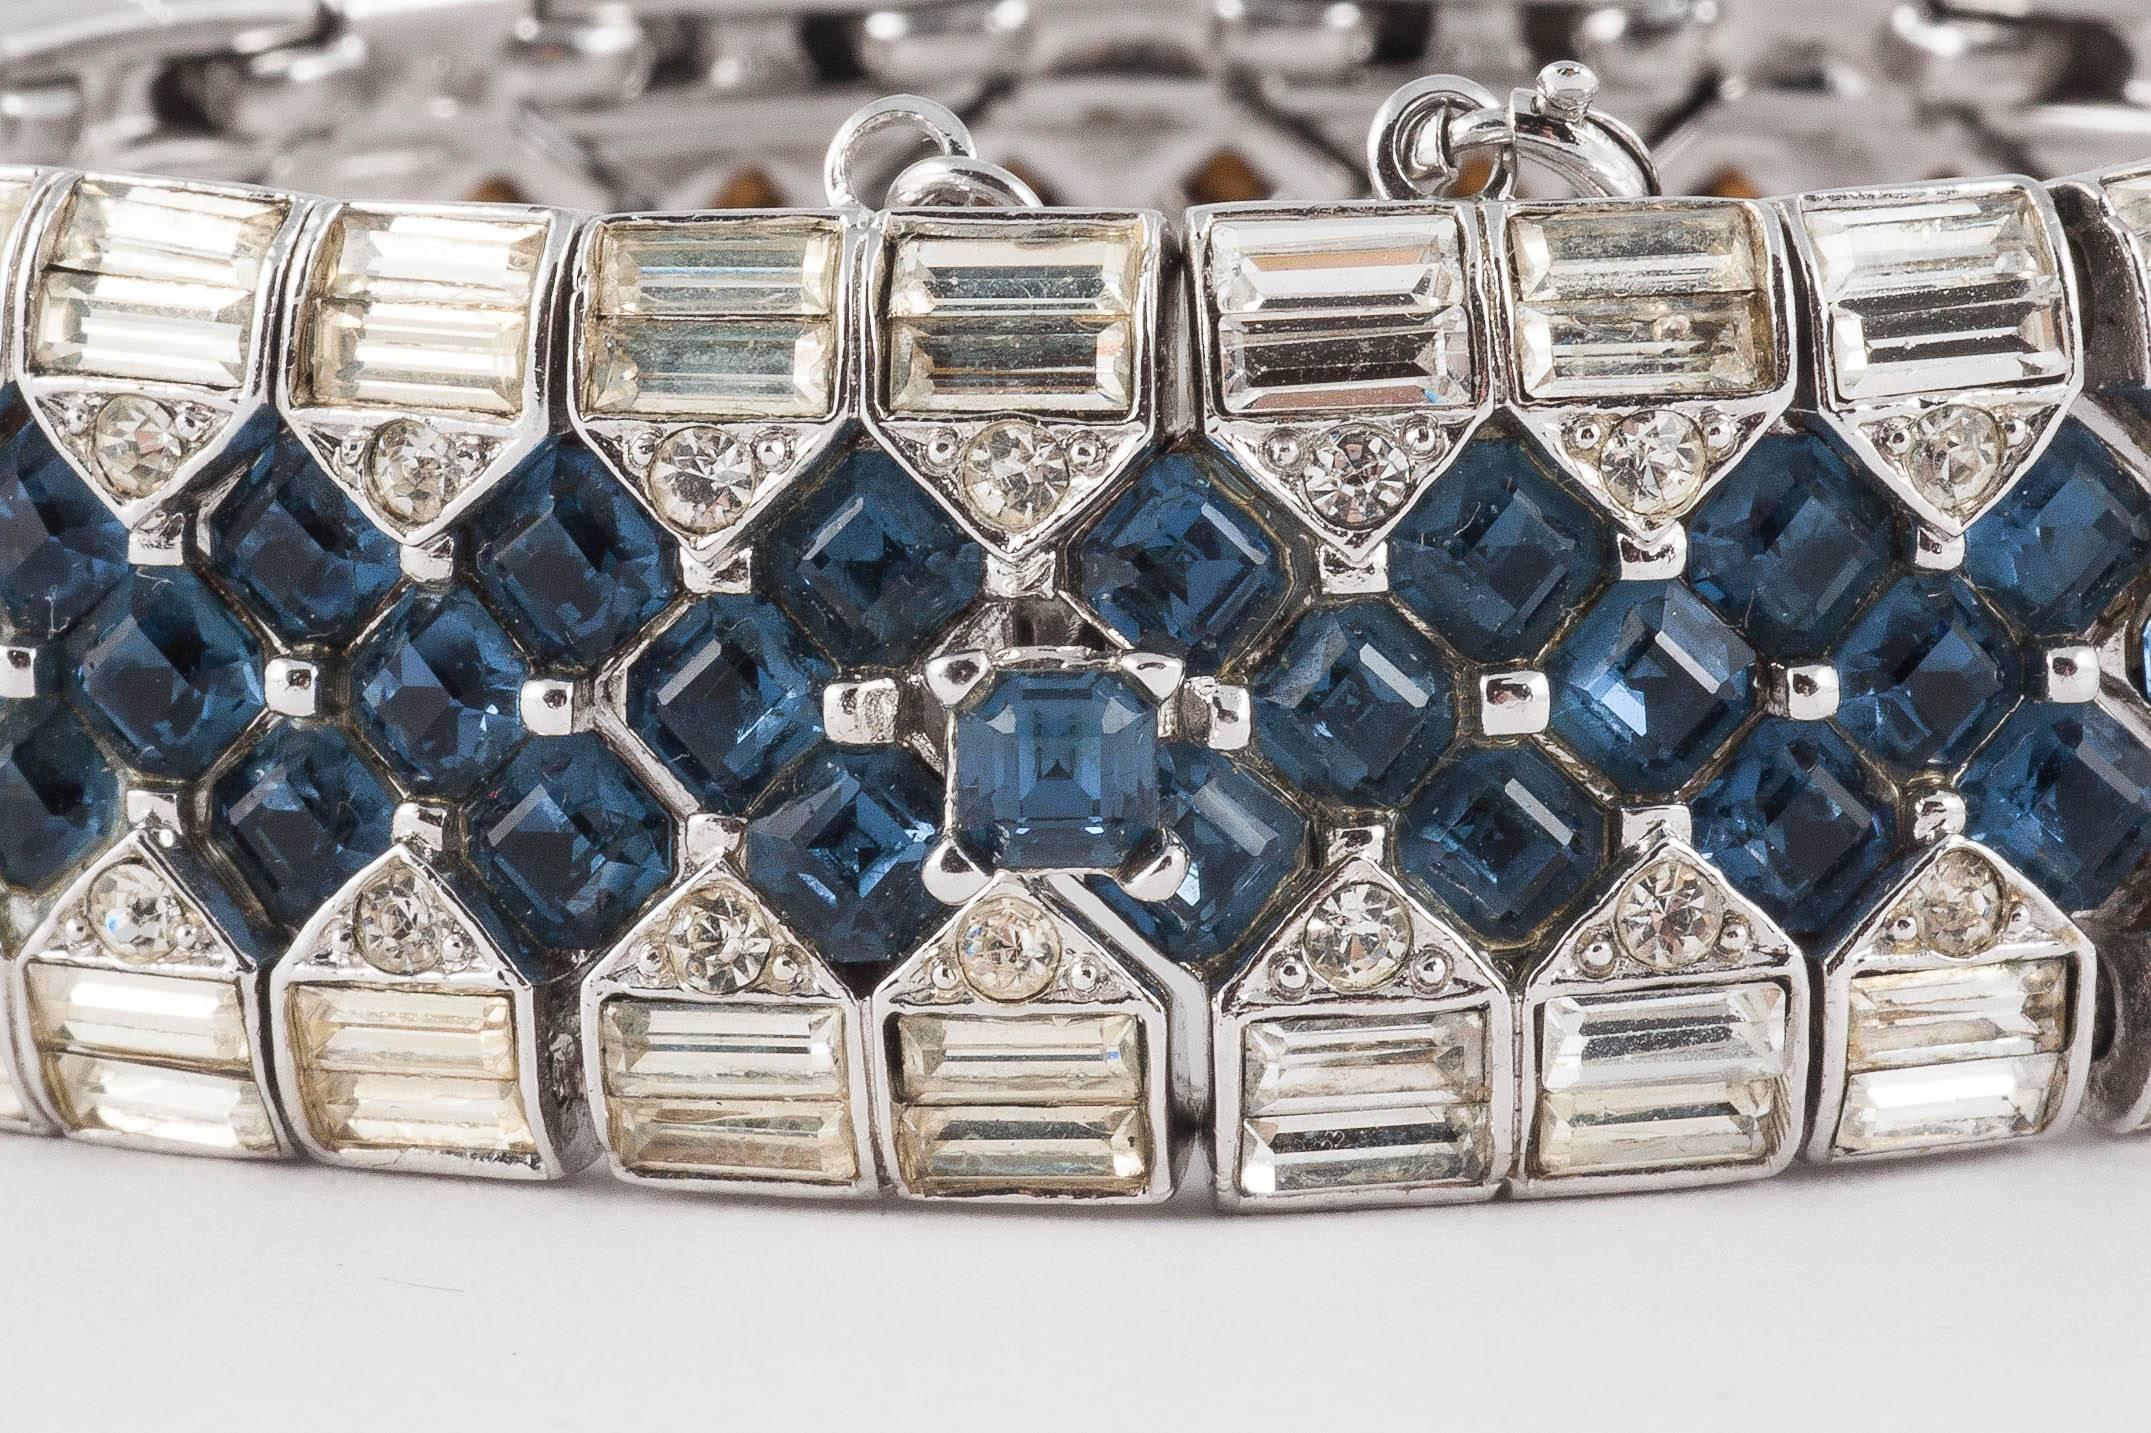 Exquisite pave set bracelet, with sapphire square paste, lined with clear paste baguettes, creating a look as if the bracelet is pulling back to reveal the square cuts beneath. The pastes are set in rhodium plated metal, with a safety chain option